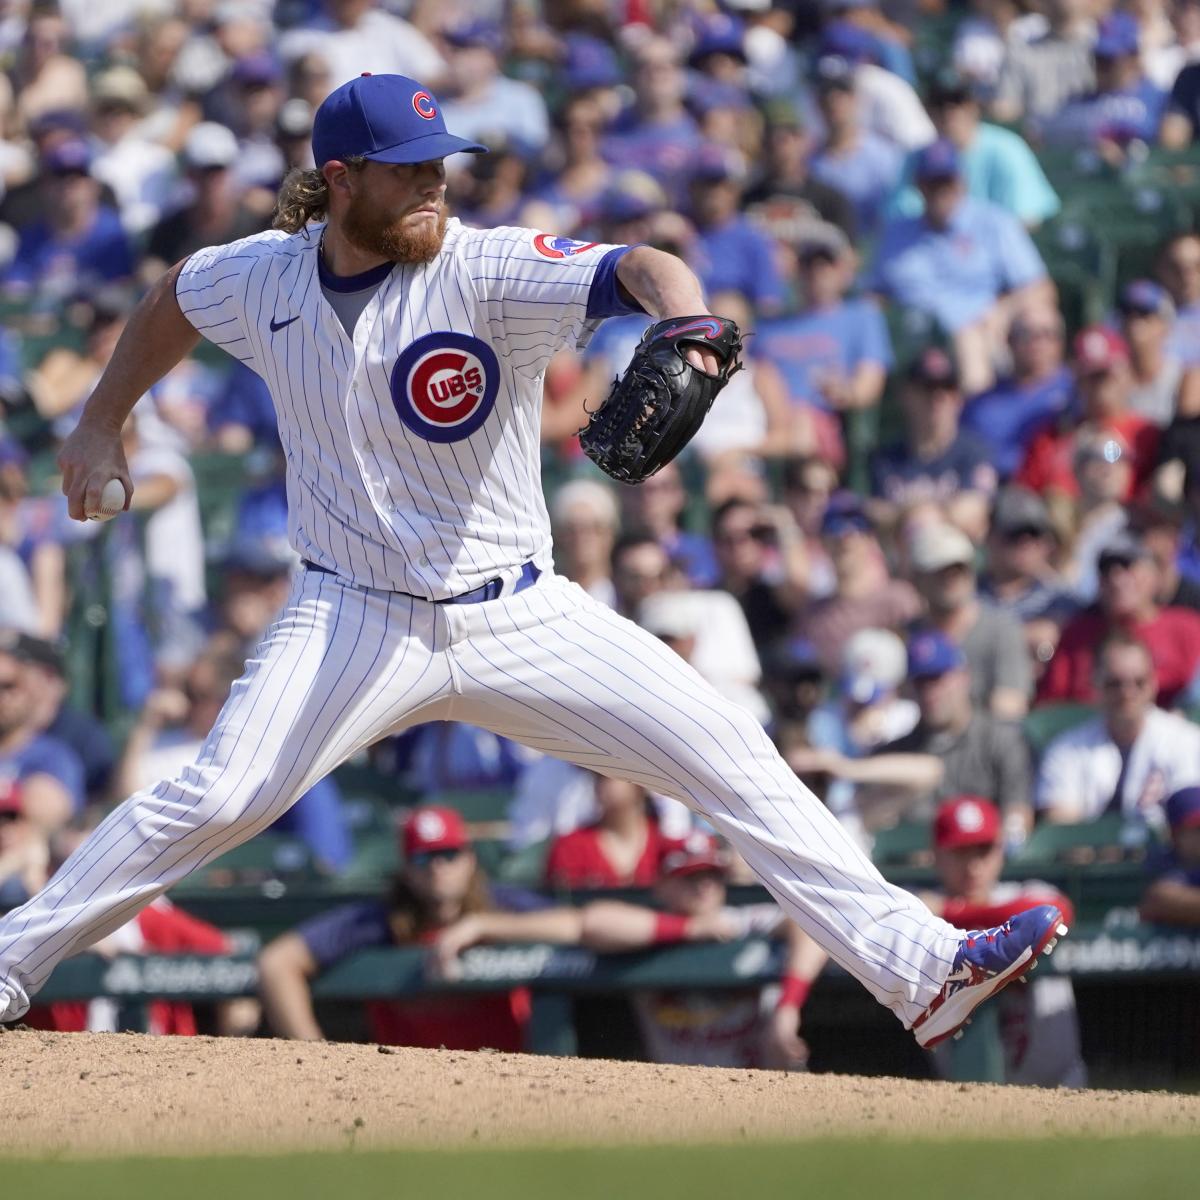 Report: Craig Kimbrel Traded to White Sox from Cubs Ahead of 2021 MLB Deadline